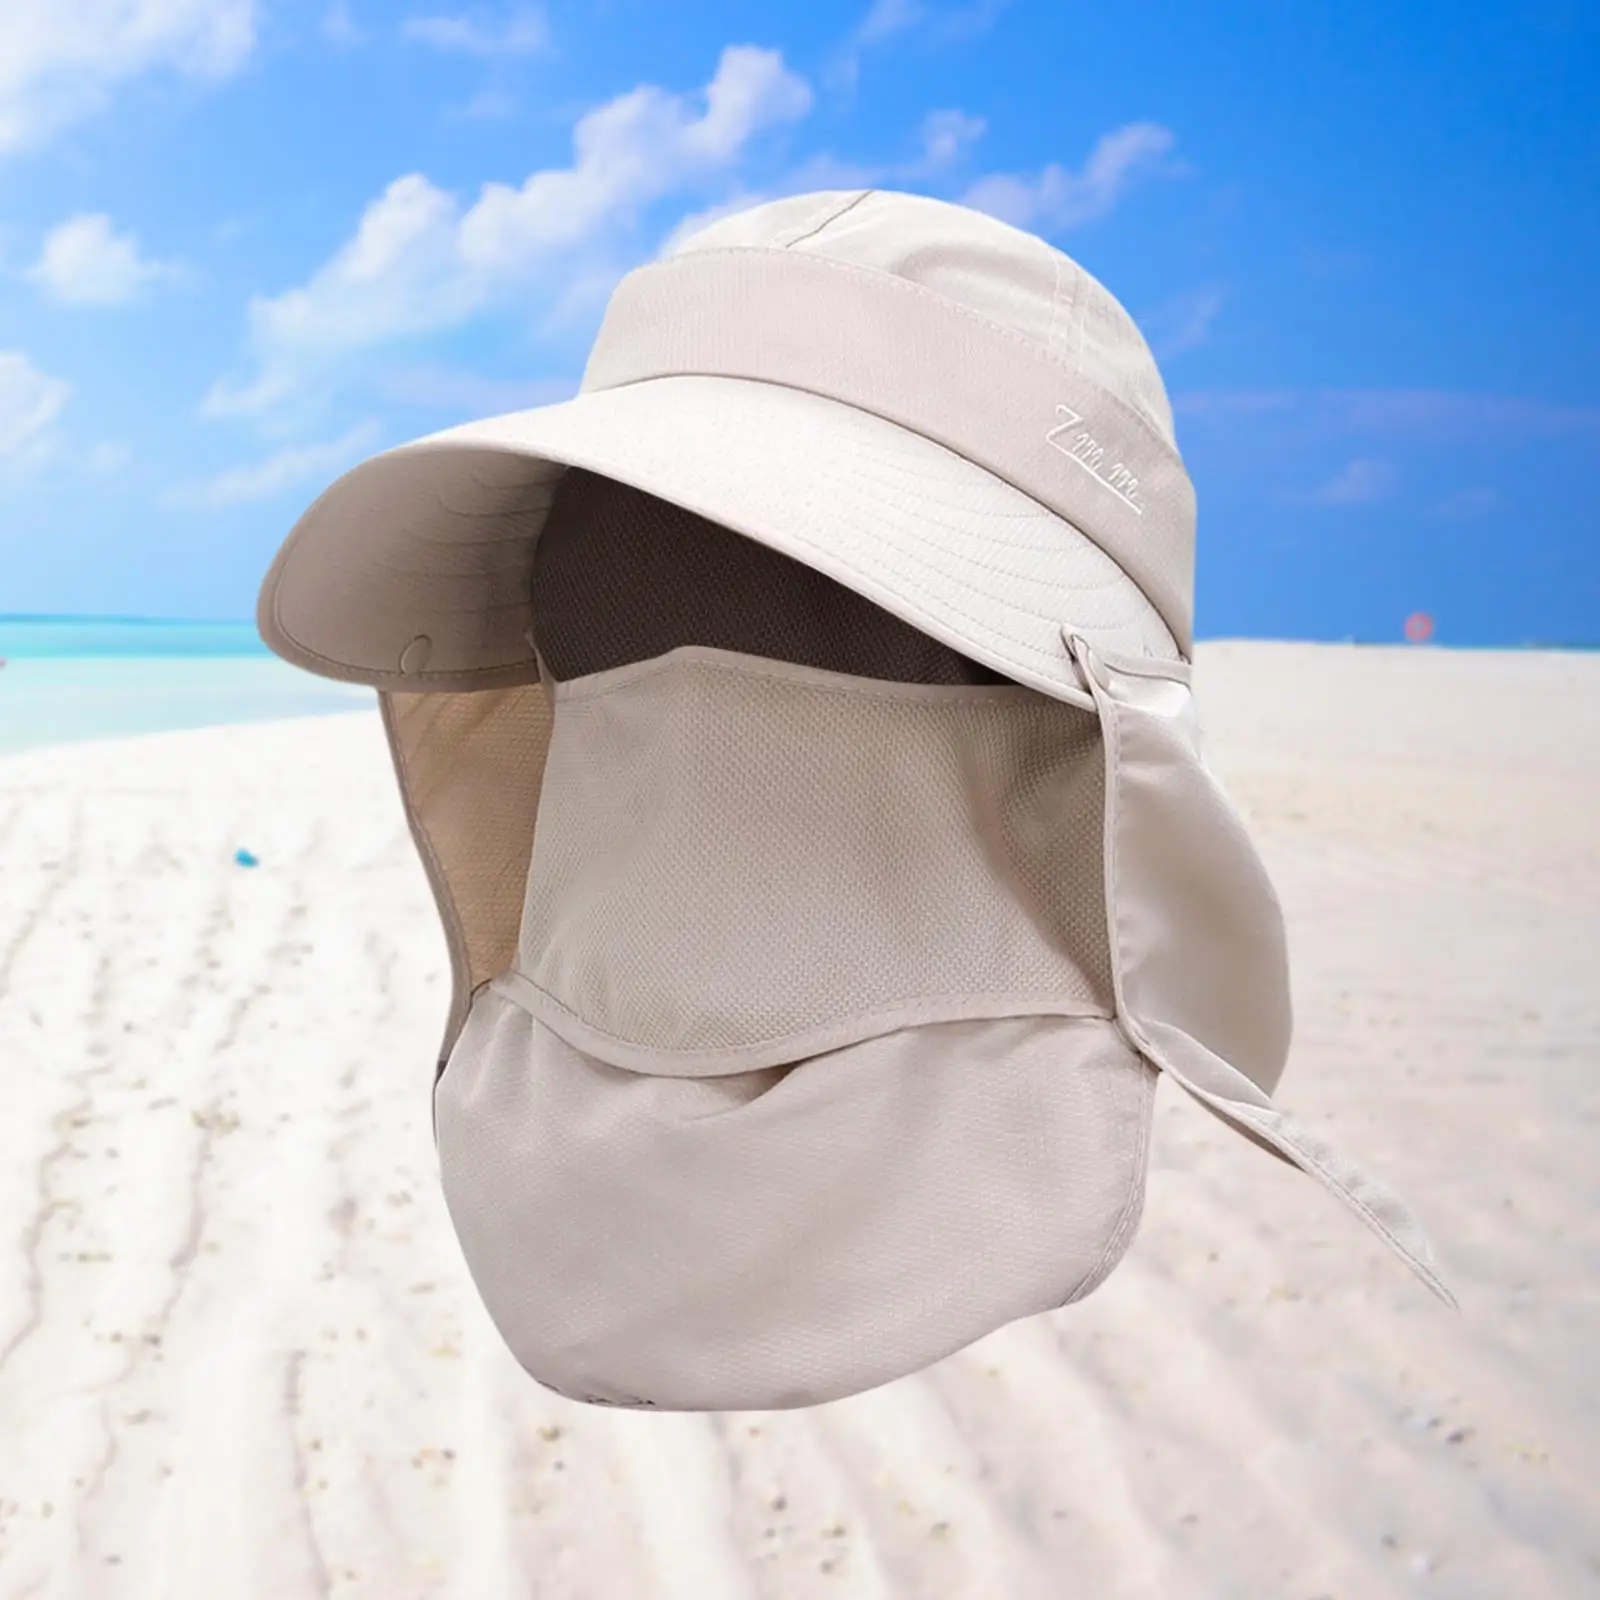 Sun Protection Face Covering with Removable Neck Flap Cover for Unisex Beach